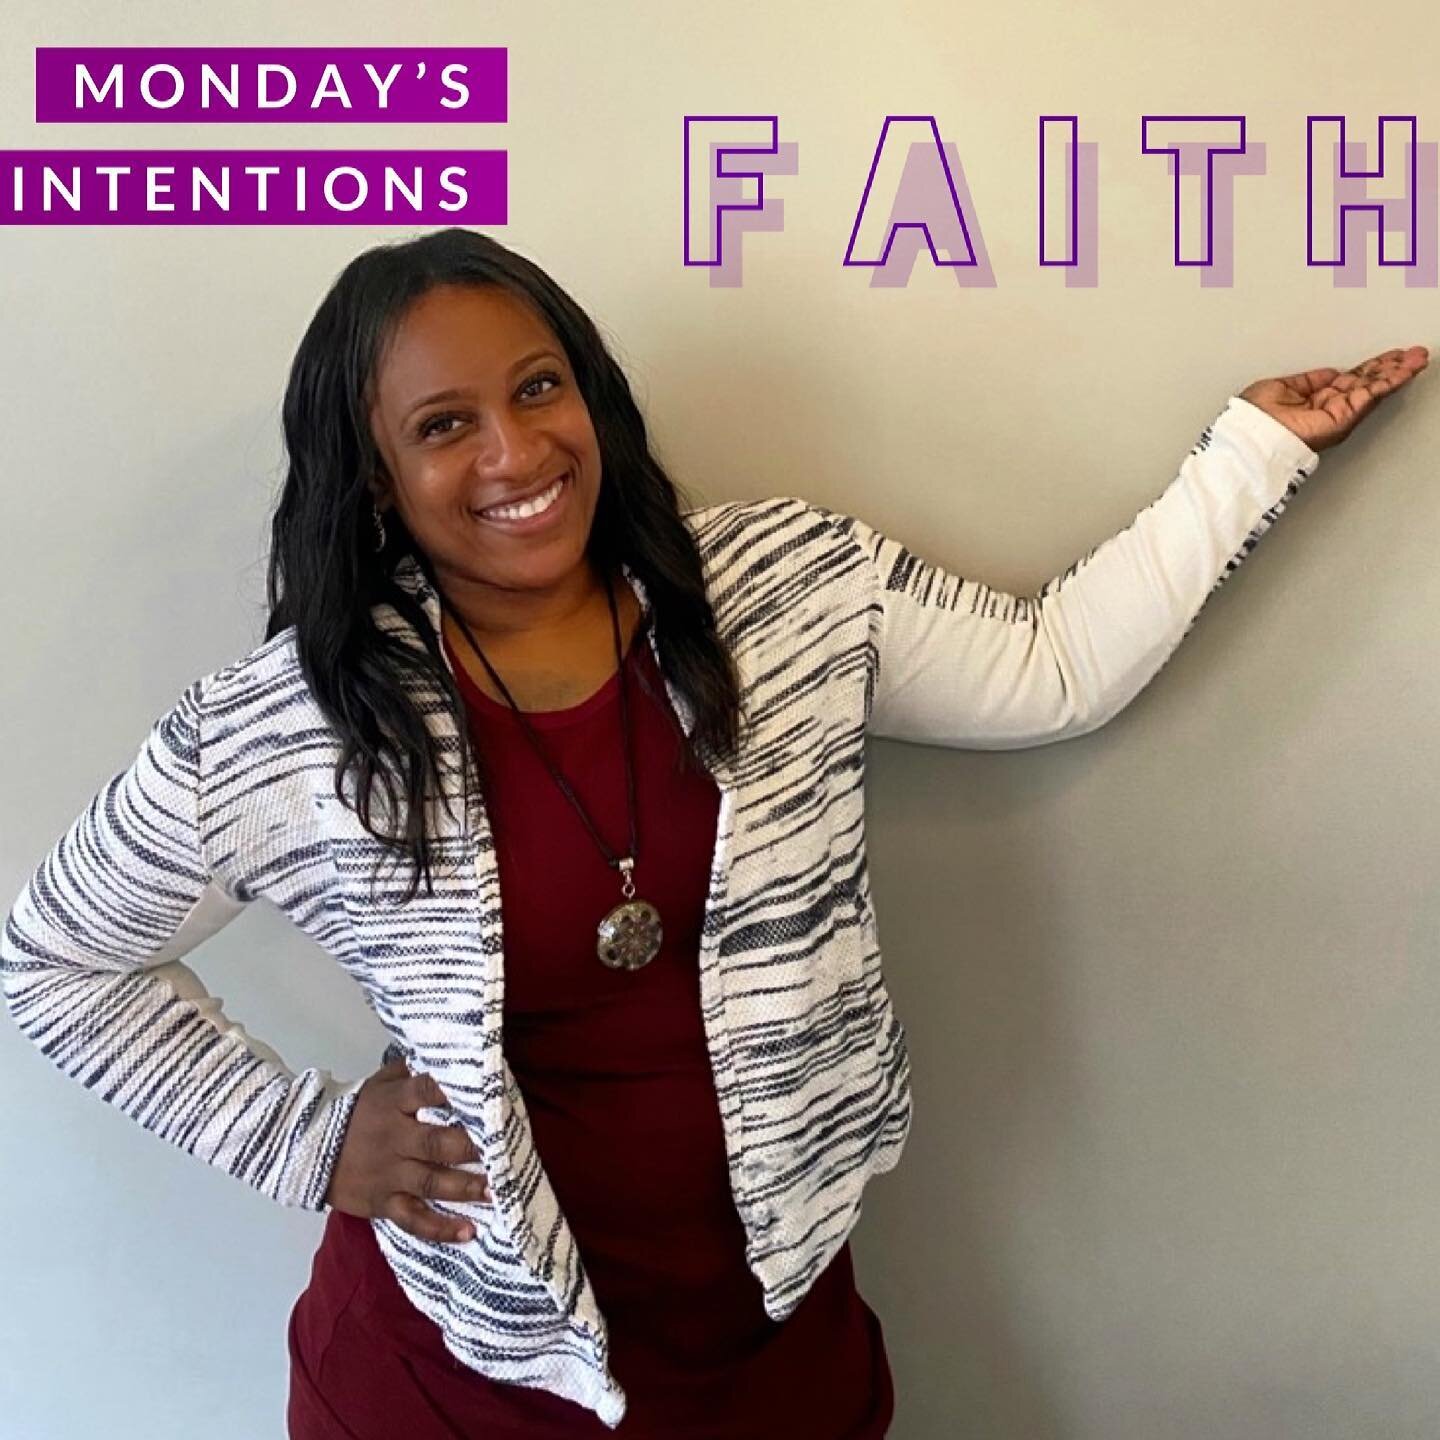 Happy Monday! We are rolling into April with Faith! Extreme #faith that we will overcome fear, faith we&rsquo;ll get this new job opportunity or this new business venture will pop off, faithful for the prospect of true love, faithful for the possibil